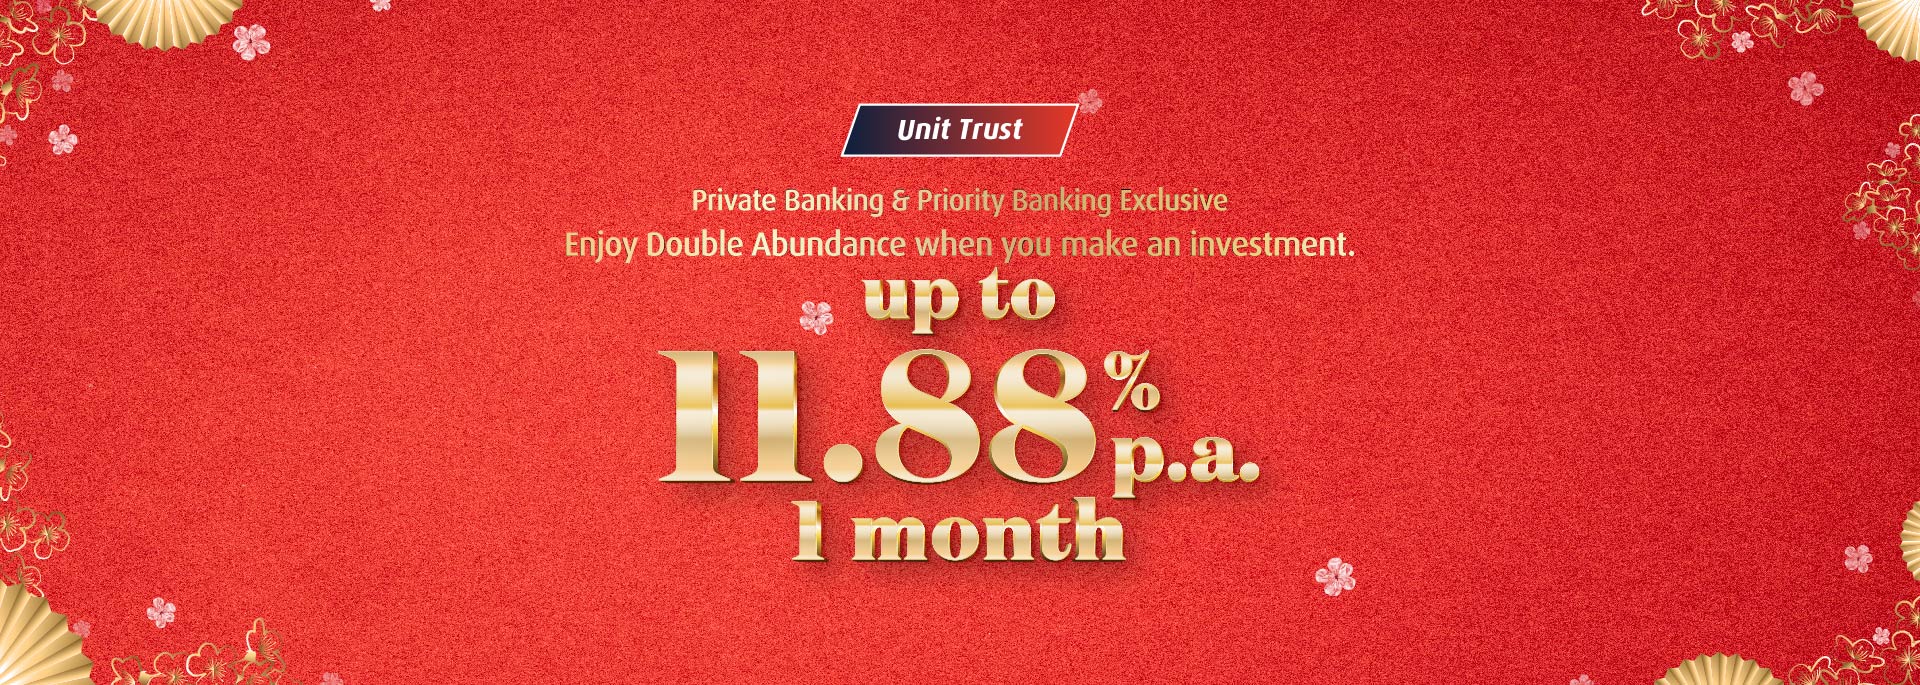 Make a Unit Trust investment and be entitled to a Fixed Deposit rates of your choice